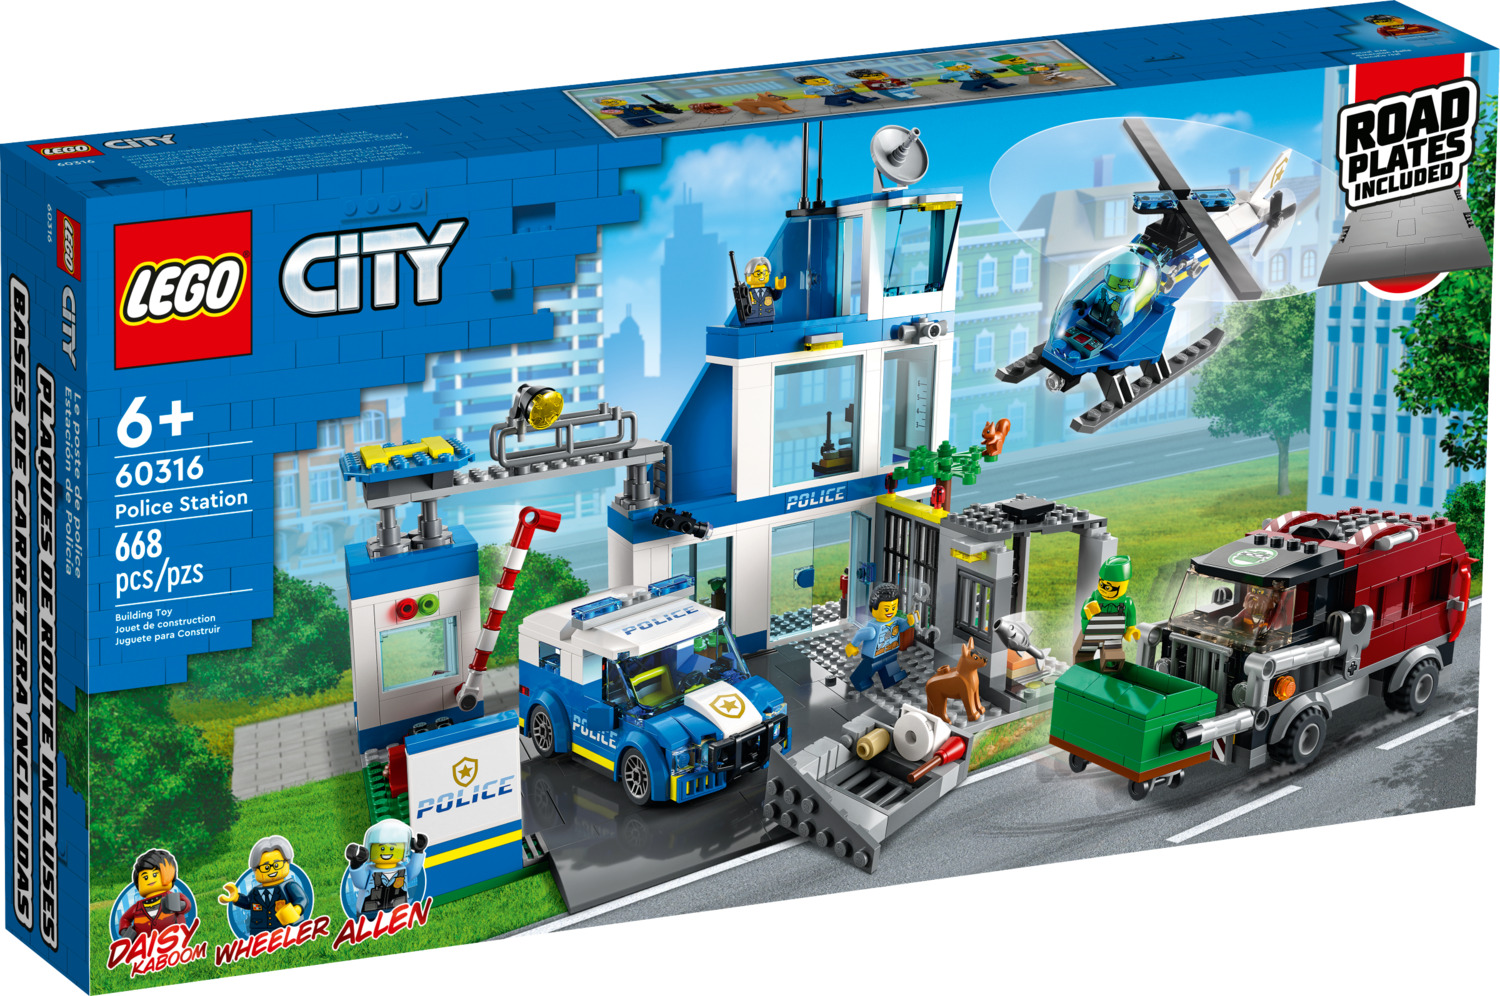 City: Station - The Toy Hanover